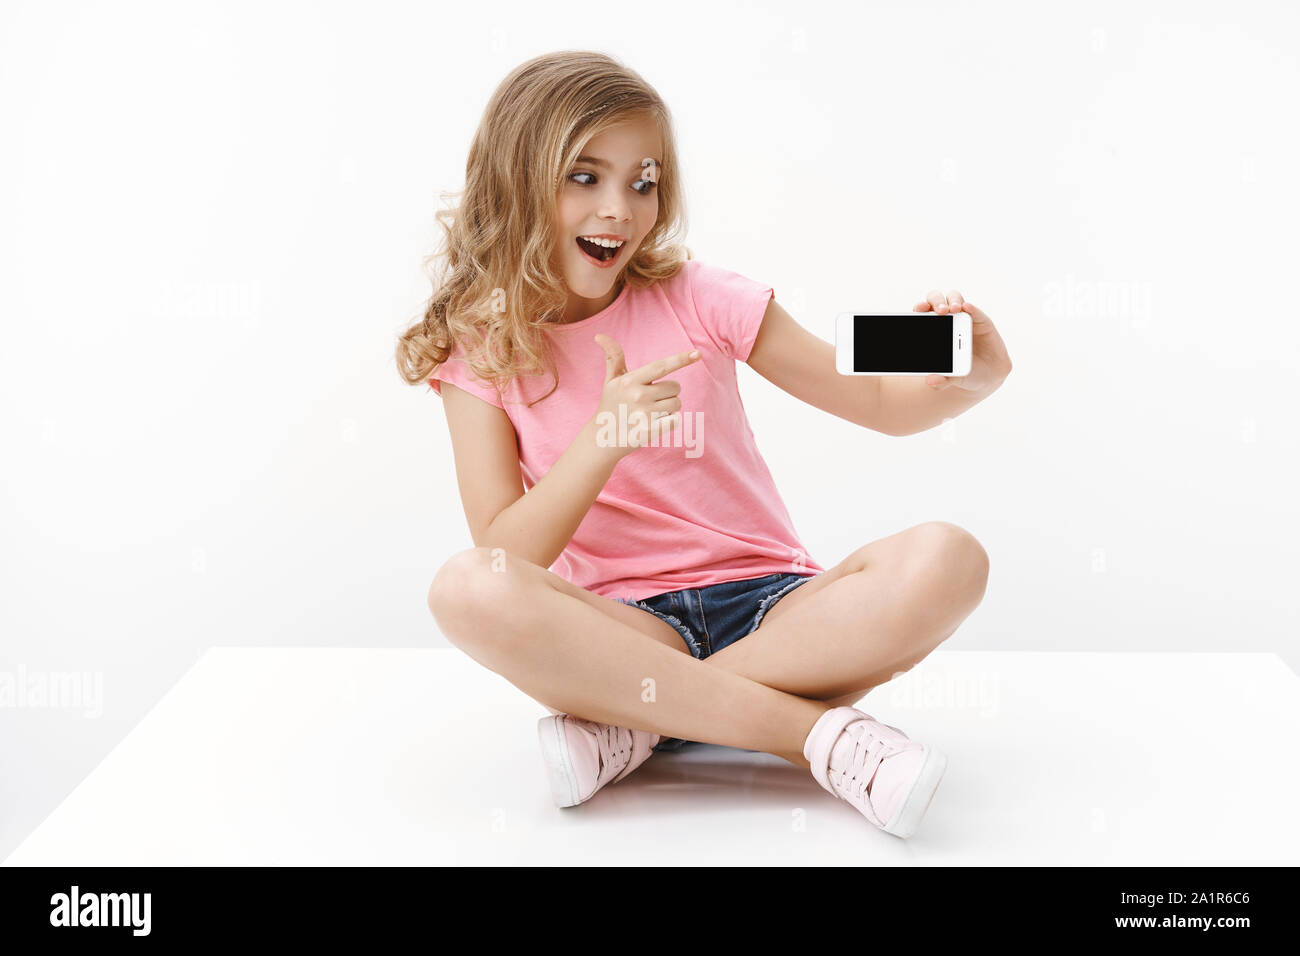 Cheerful excited cute blond little girl sitting on floor with crossed legs, hold smartphone, pointing mobile phone display and looking thrilled Stock Photo